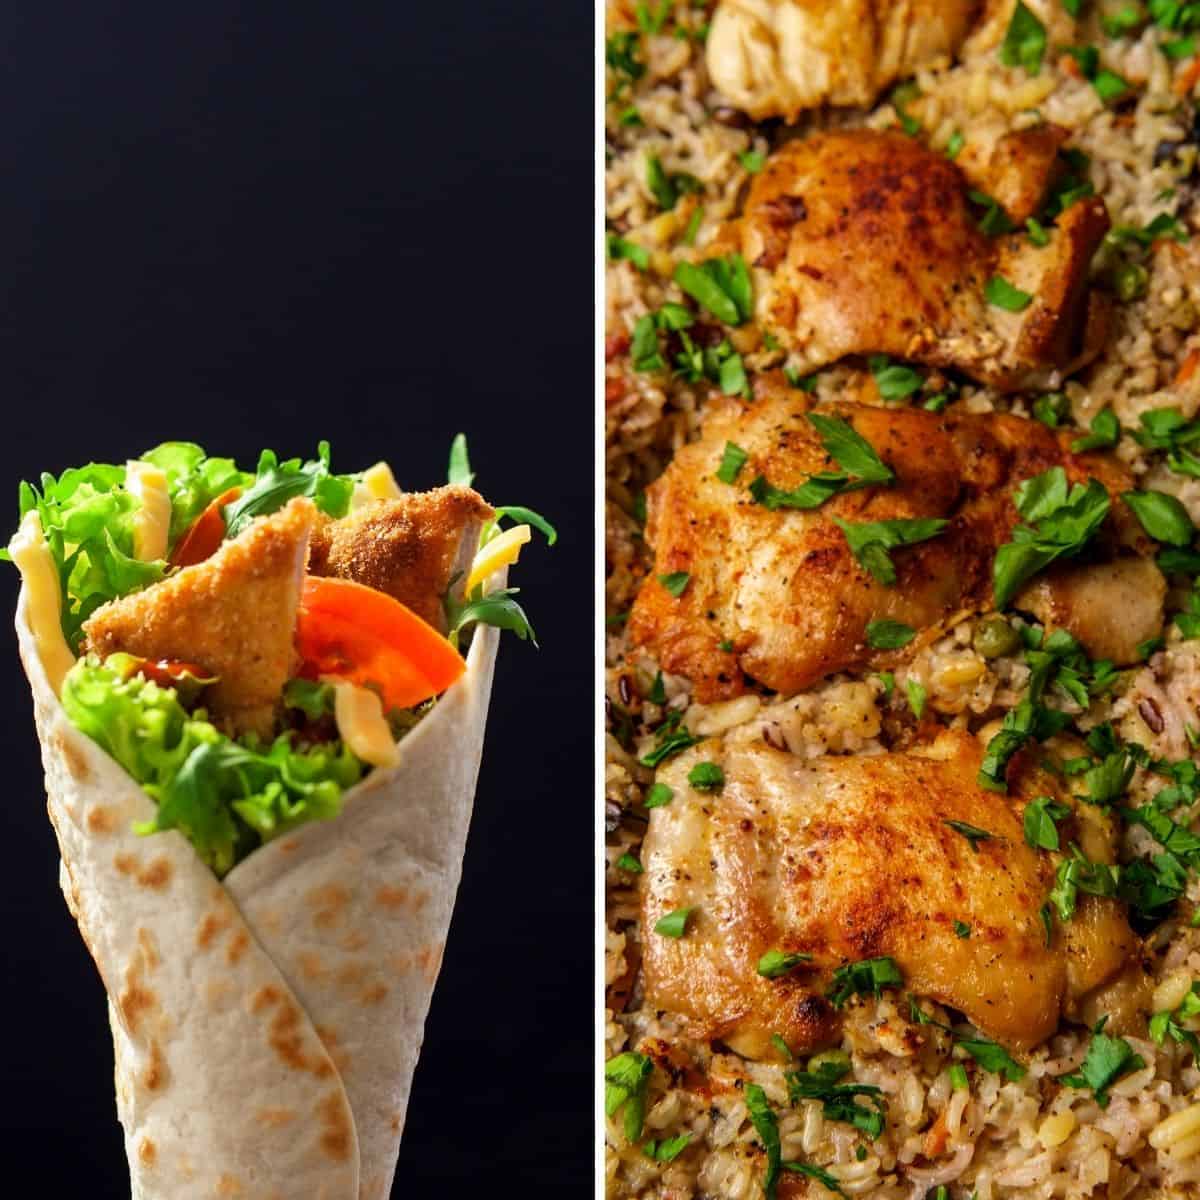 chicken ceasar wraps and baked chicken thighs shown in collage 